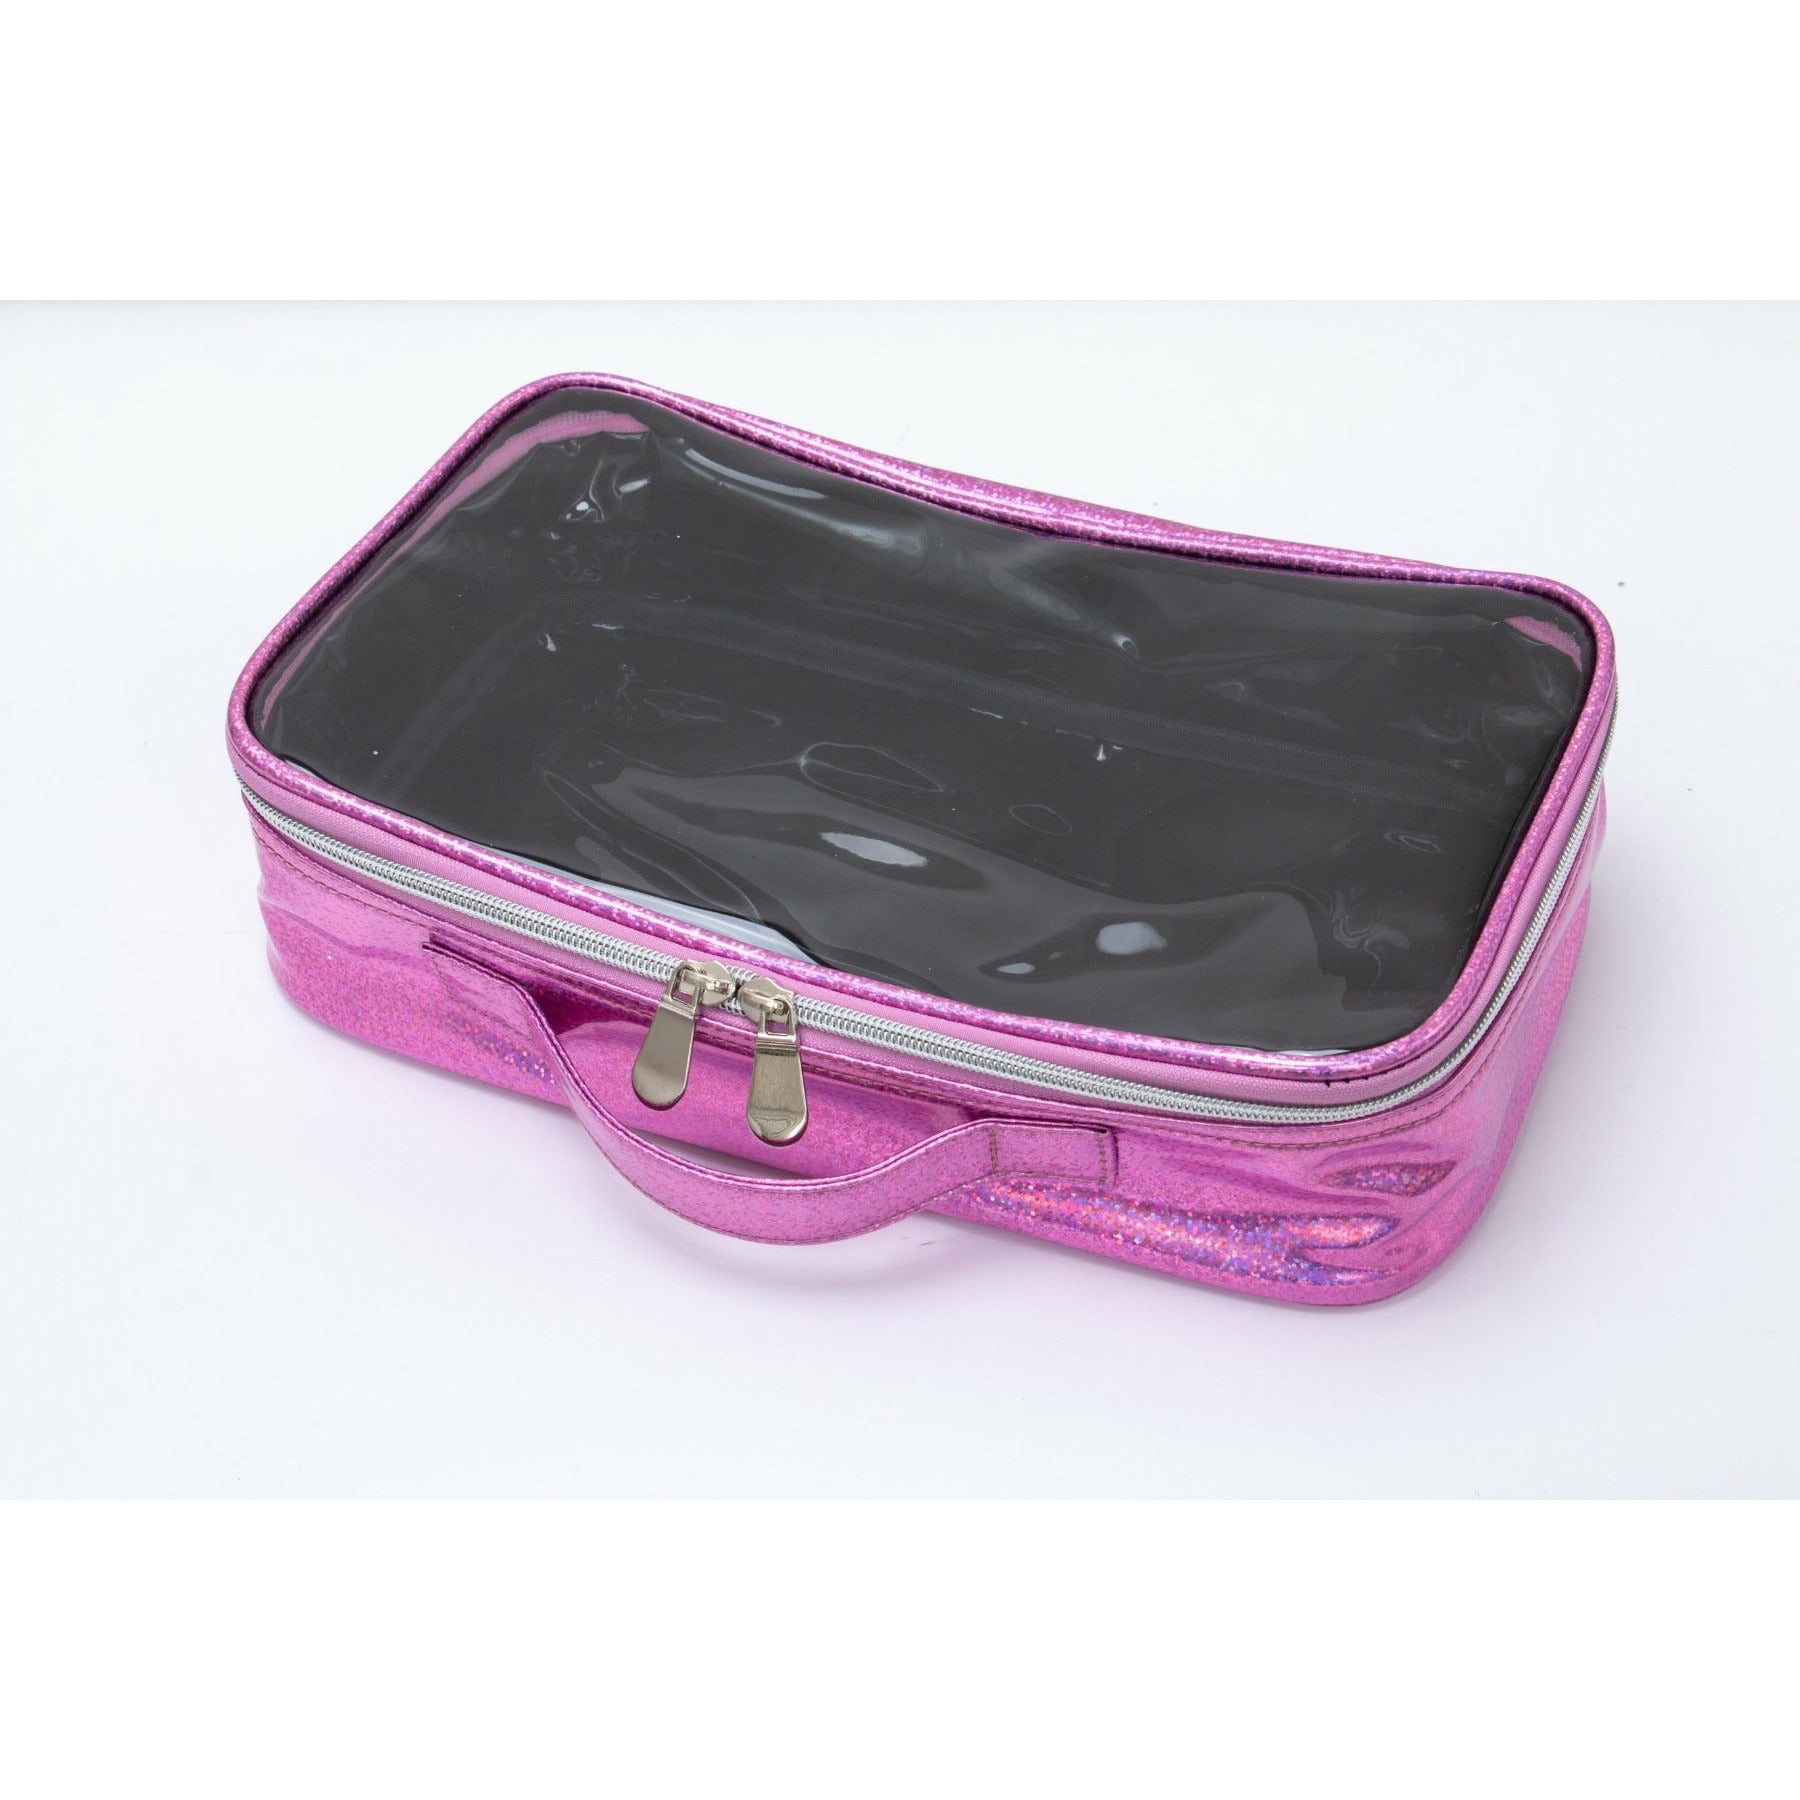 DivaDolly Accessory Cases - DivaDolly